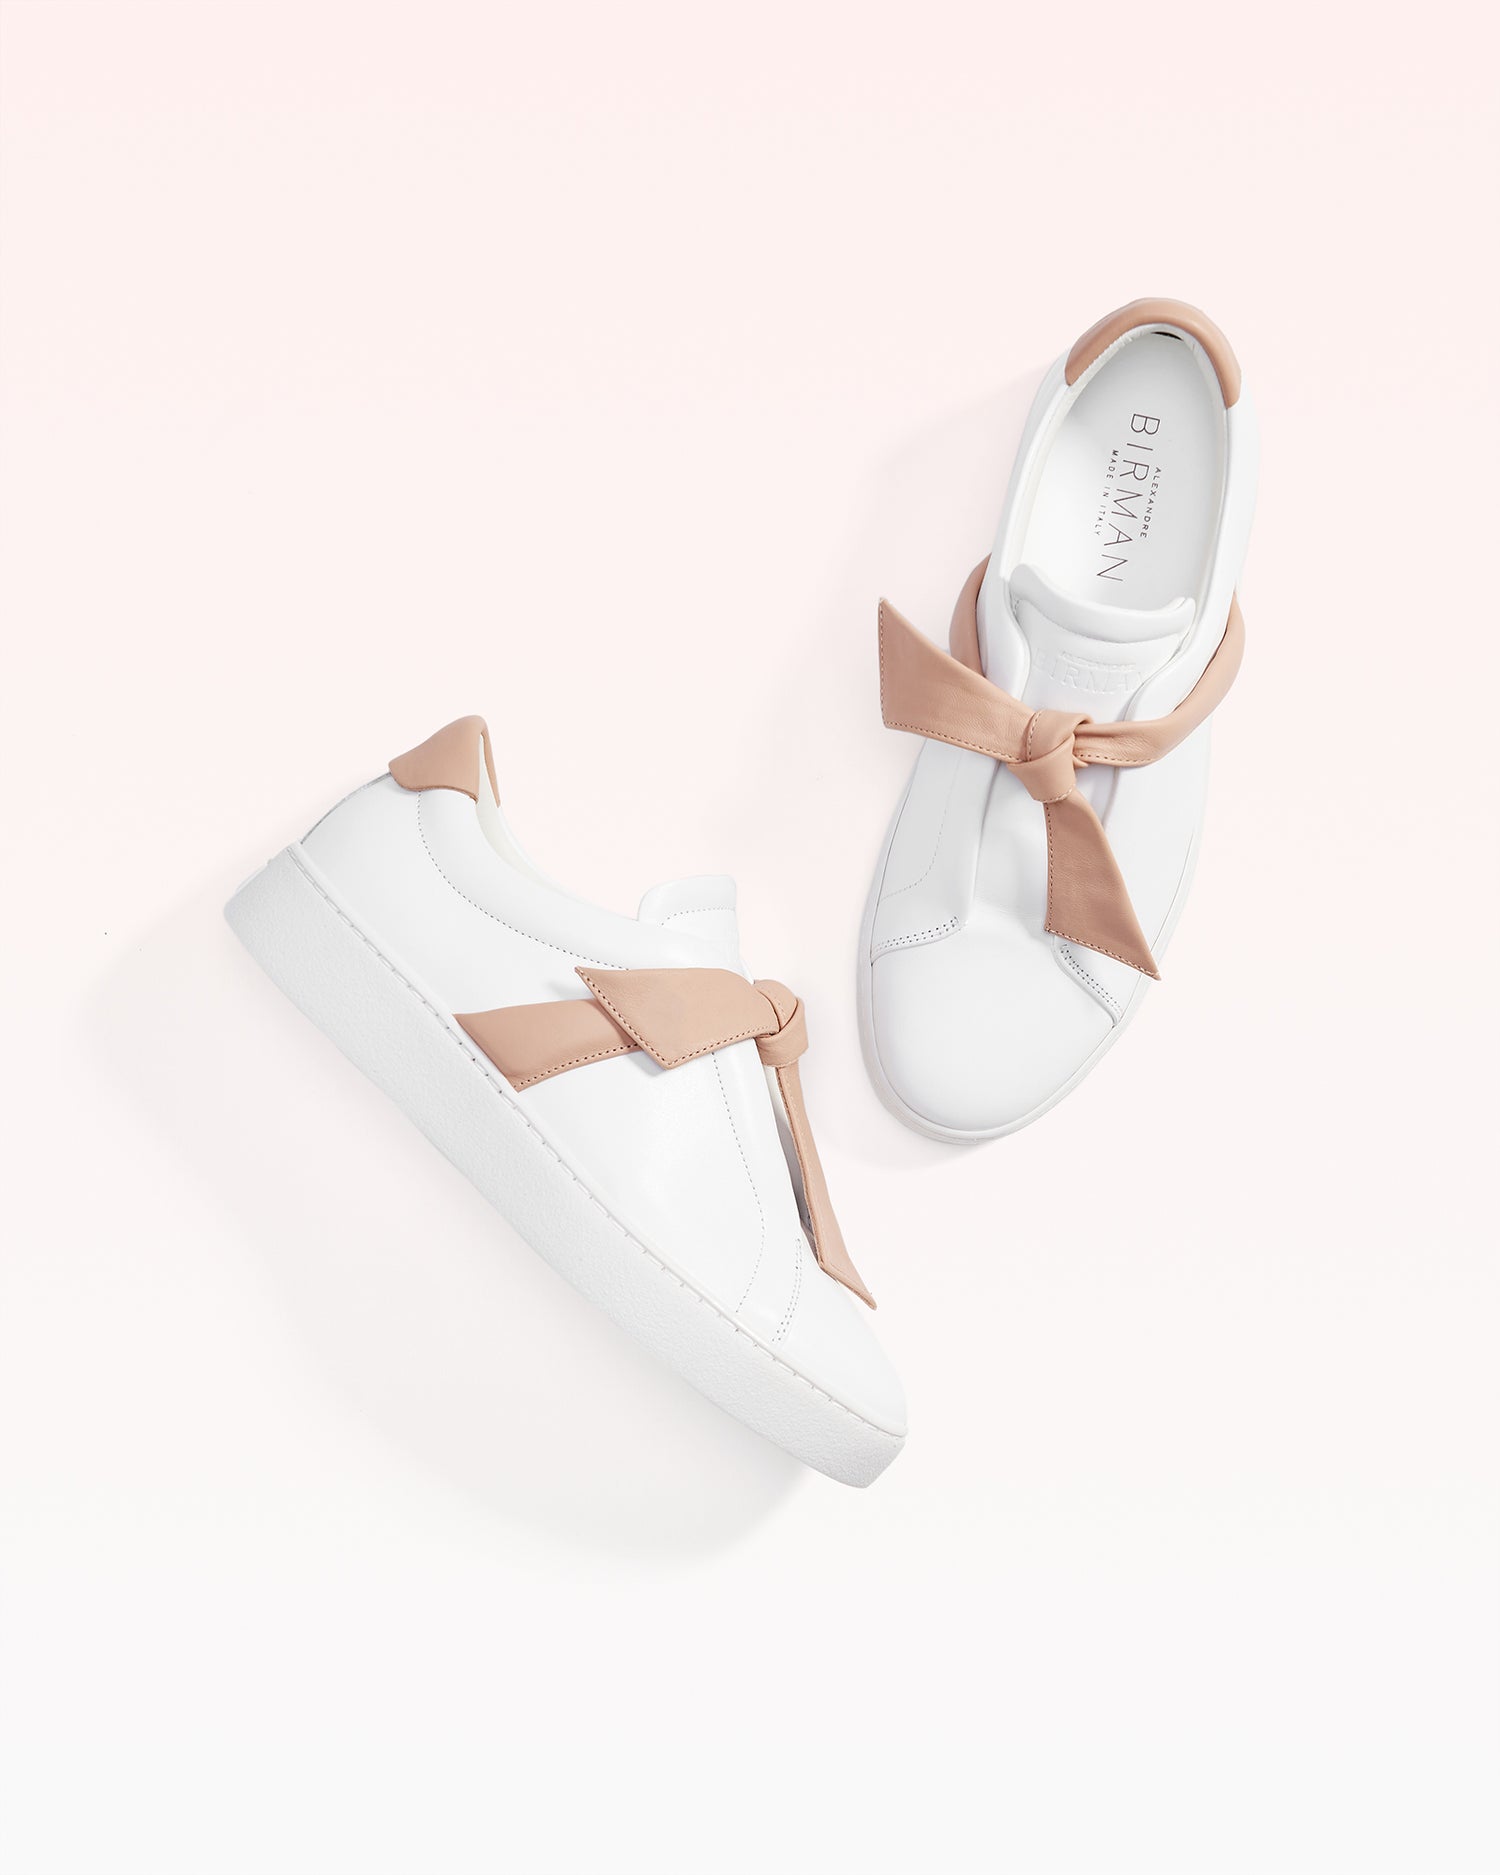 Clarita Sneaker Suede Nude & White Sneakers Carry Over   